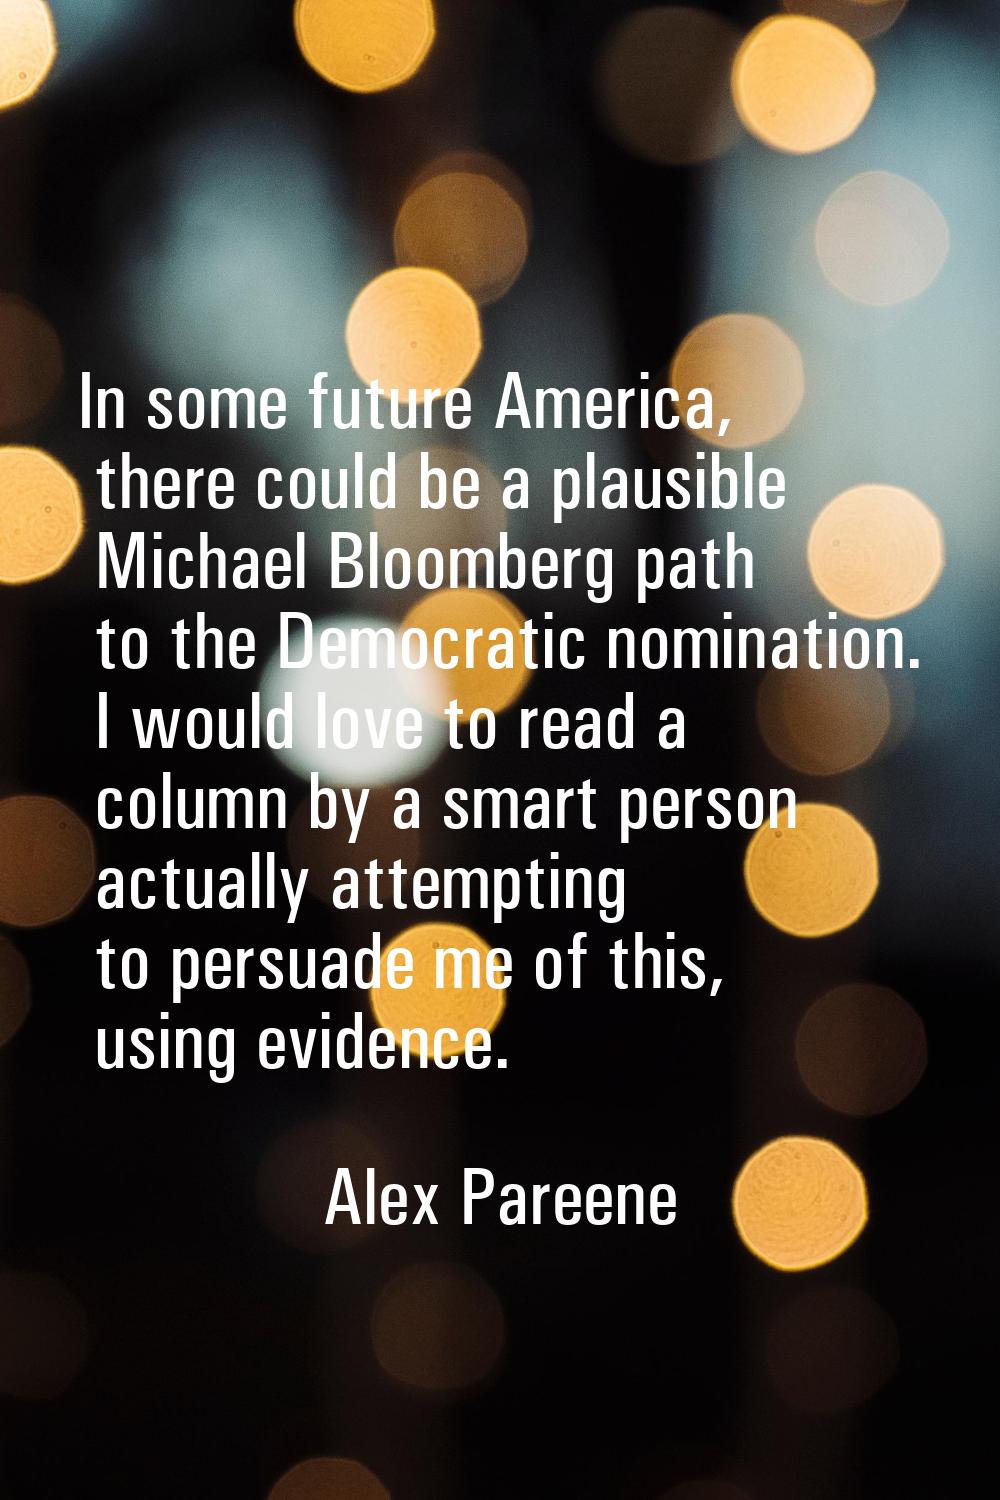 In some future America, there could be a plausible Michael Bloomberg path to the Democratic nominat